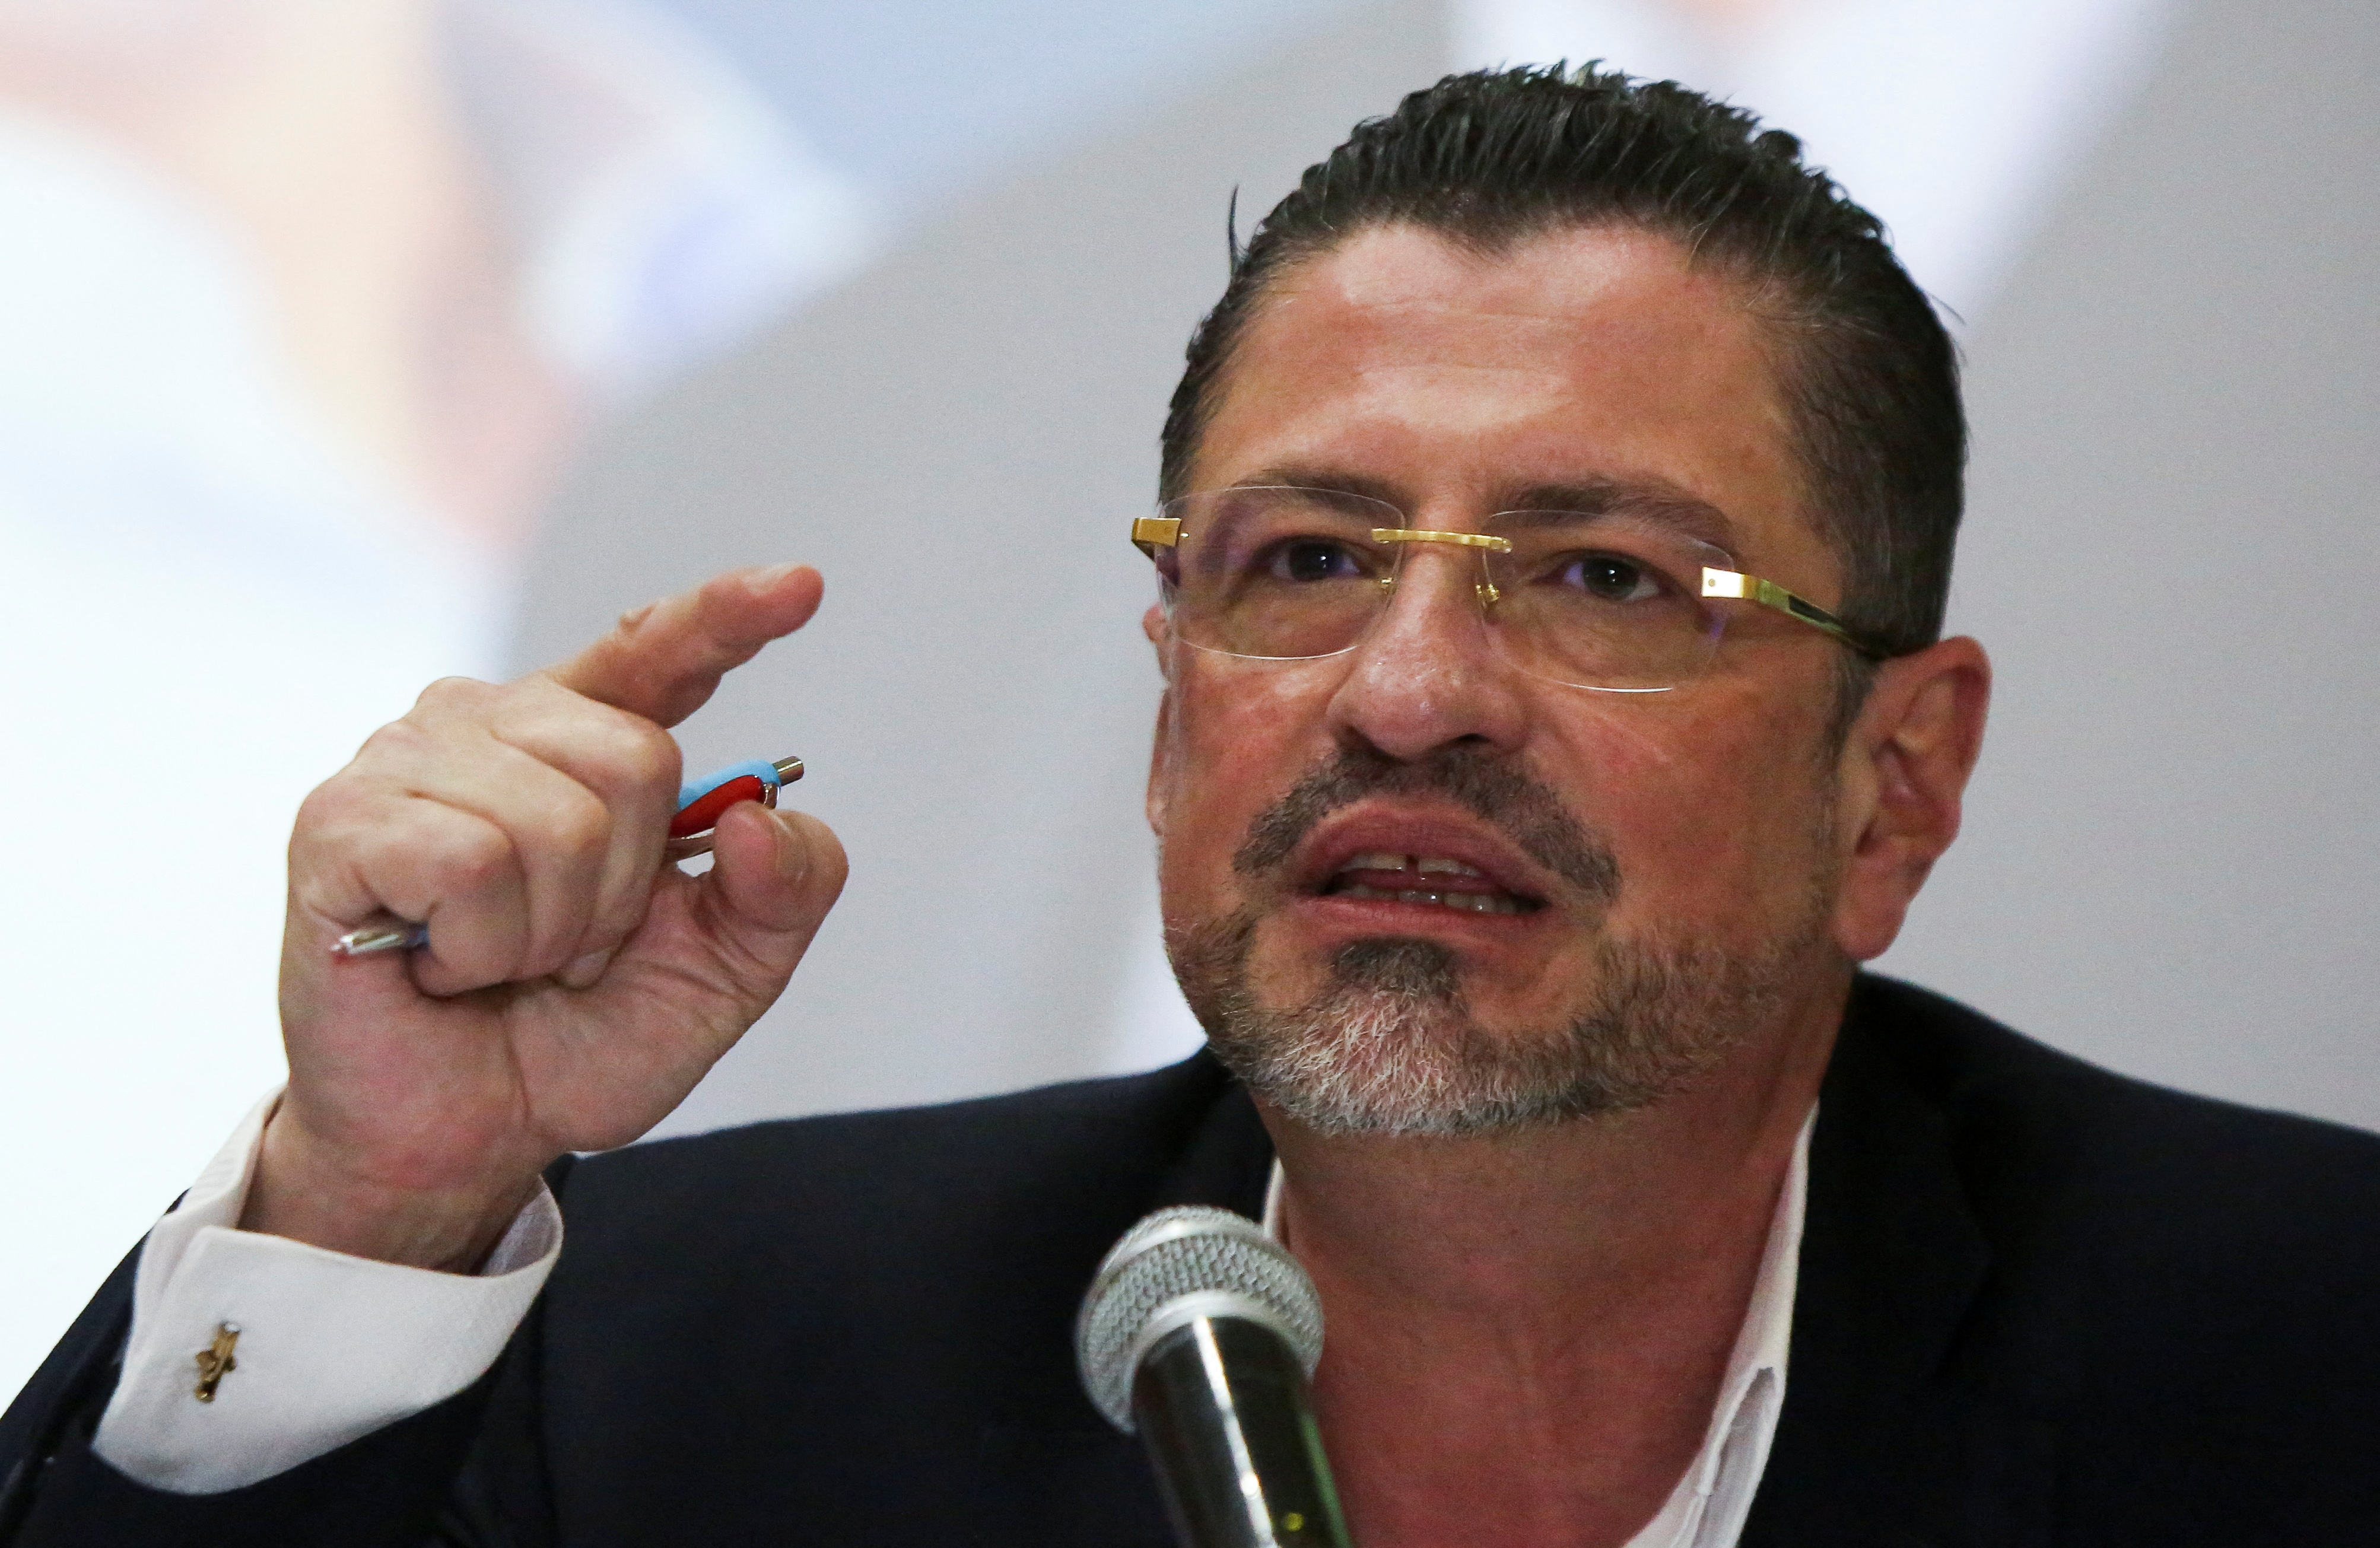 Rodrigo Chaves, presidential candidate of the Social Democratic Progress Party (PPSD), speaks to the media during a news conference in San Jose